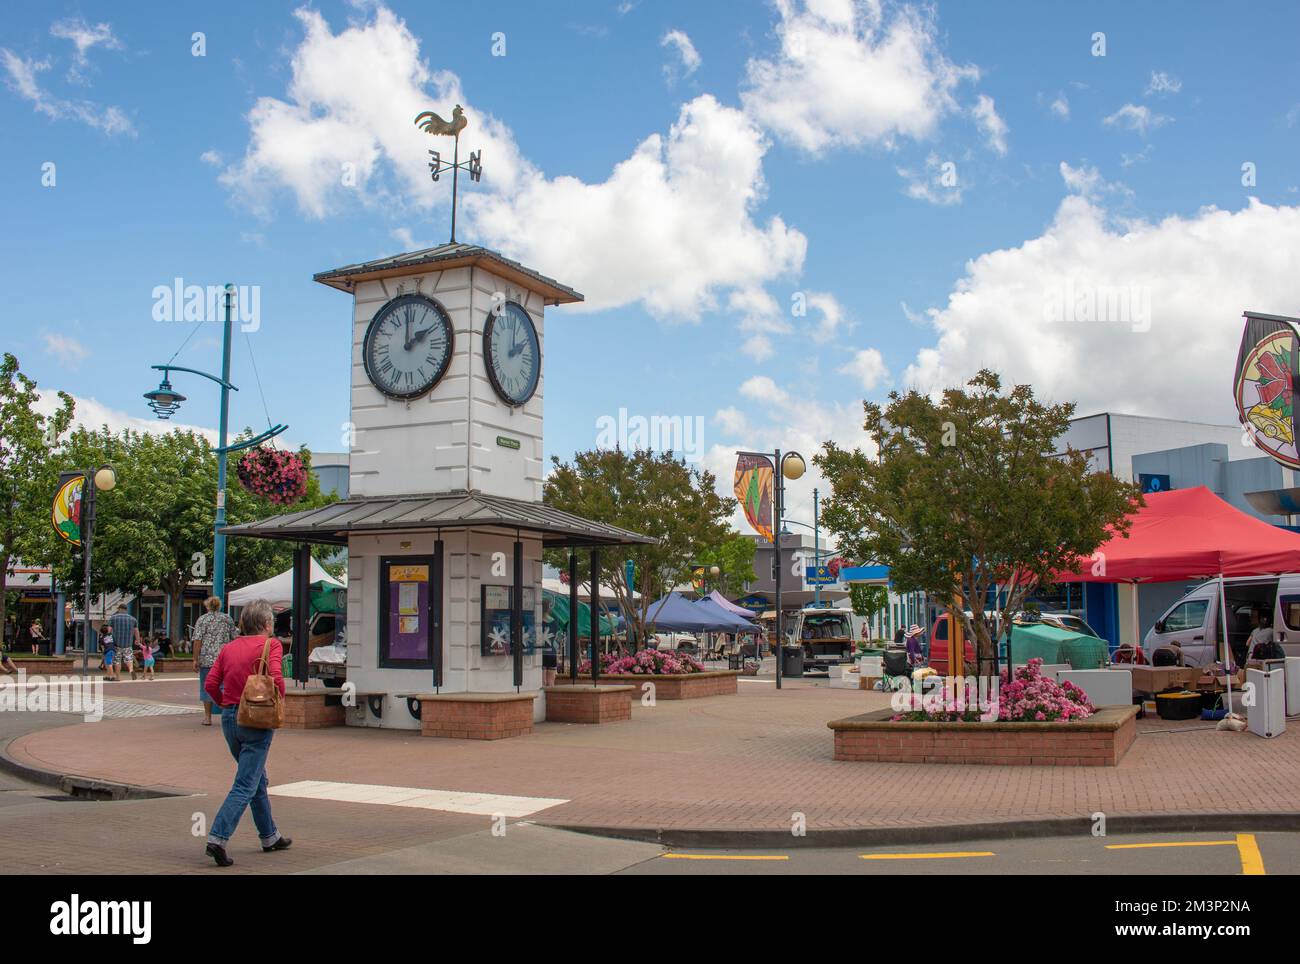 The town square in Blenheim in New Zealand, with a clock tower and shops Stock Photo